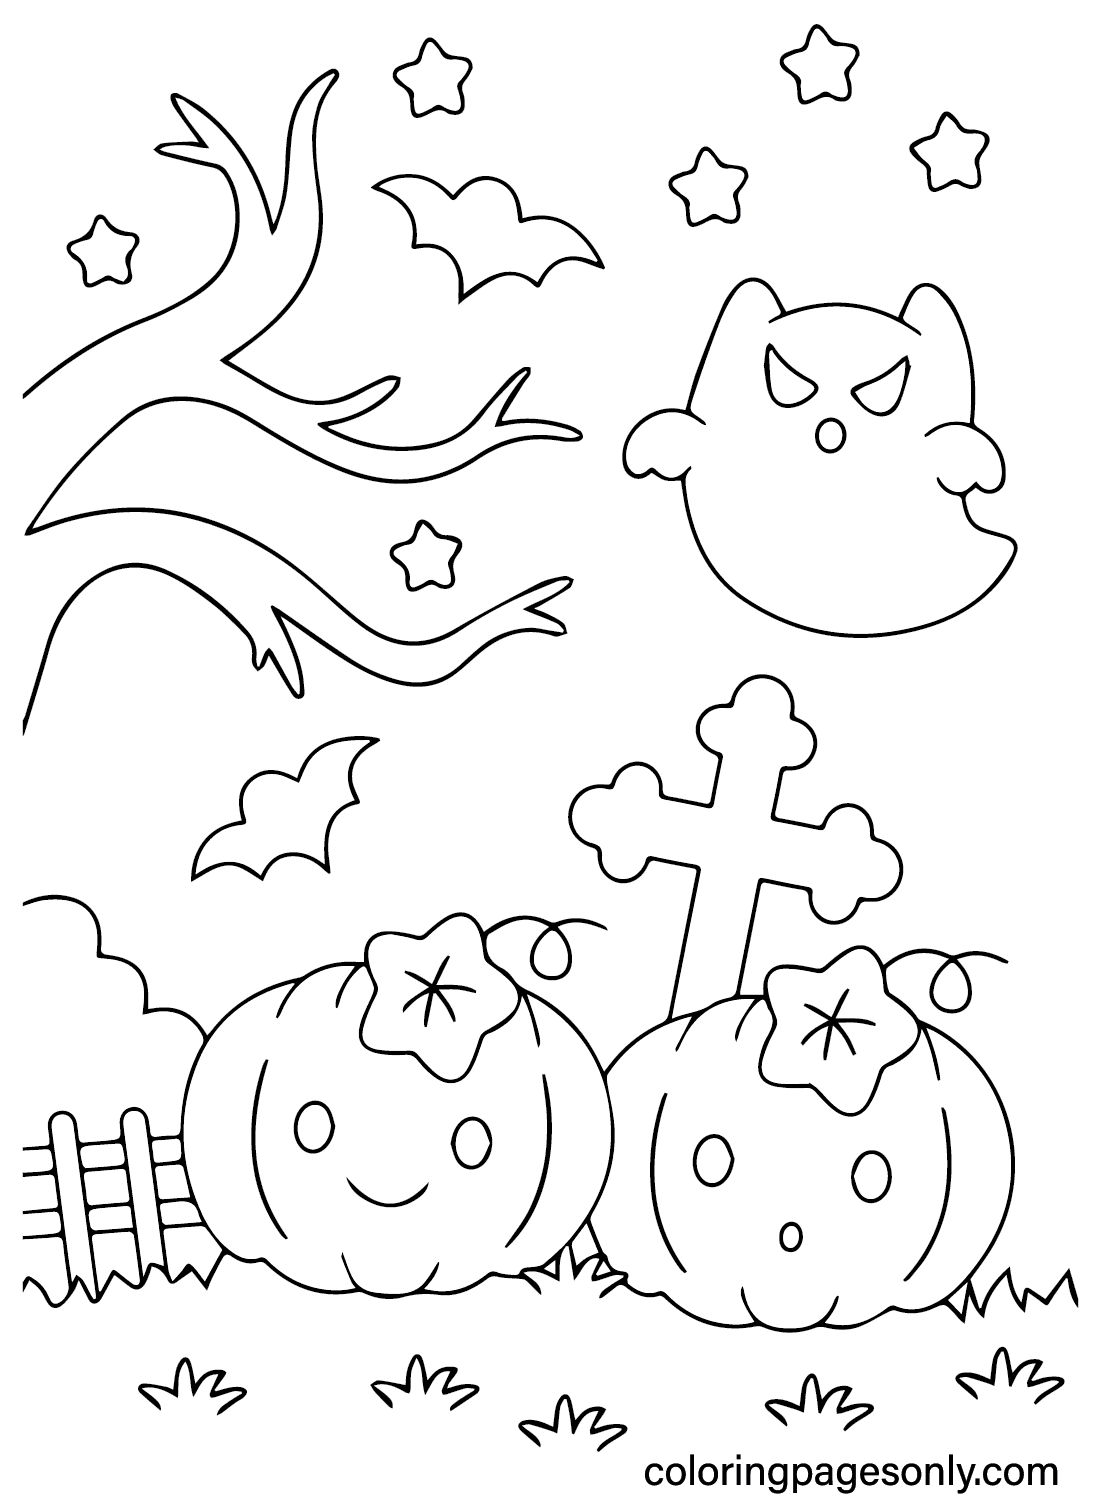 Cute Halloween Coloring Page Free - Free Printable Coloring Pages